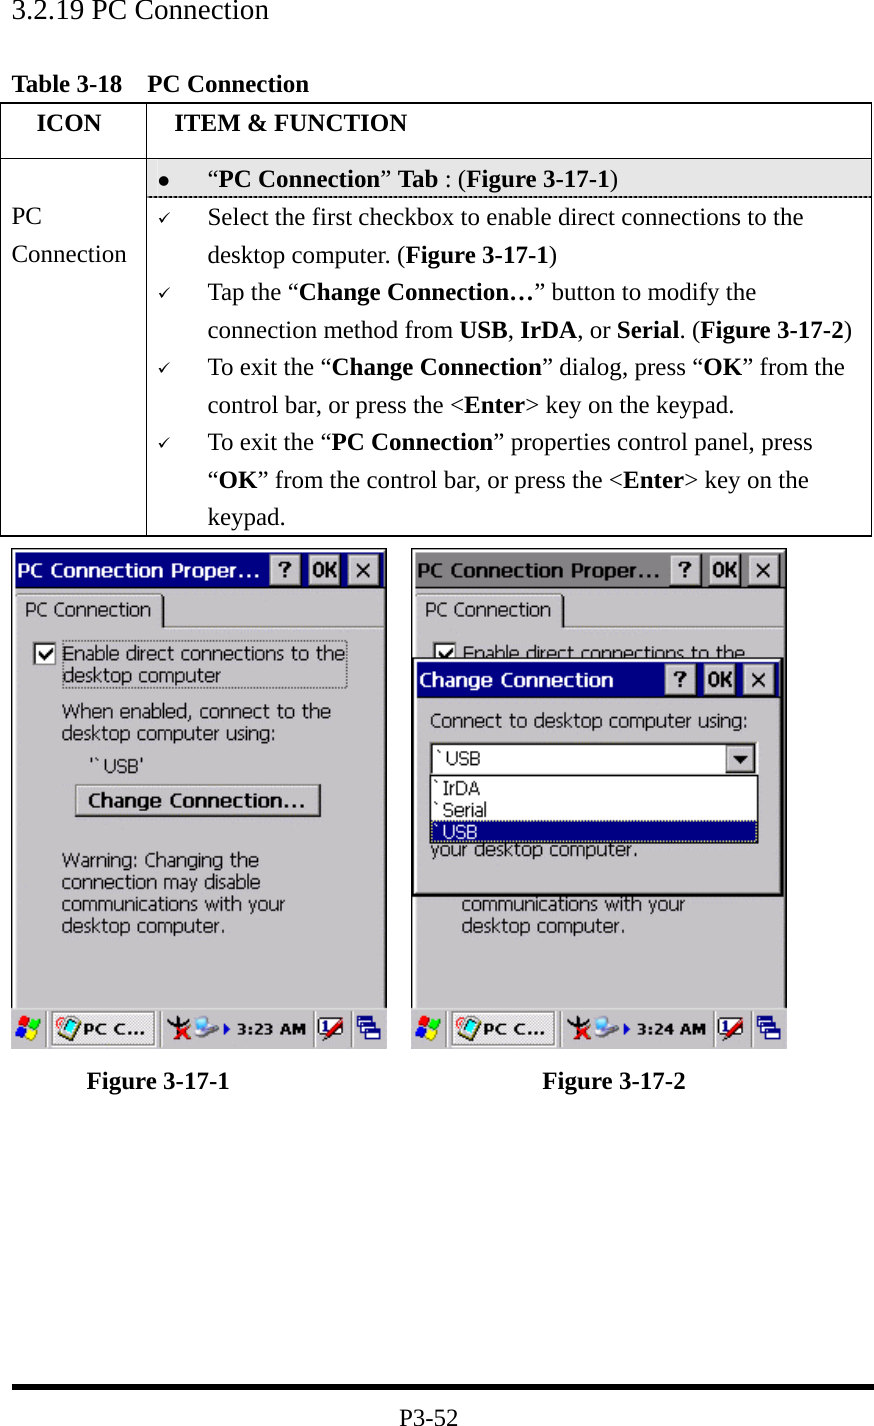 3.2.19 PC Connection   Table 3-18  PC Connection   ICON   ITEM &amp; FUNCTION   “PC Connection” Tab : (Figure 3-17-1)  PC Connection   Select the first checkbox to enable direct connections to the desktop computer. (Figure 3-17-1)   Tap the “Change Connection…” button to modify the connection method from USB, IrDA, or Serial. (Figure 3-17-2)   To exit the “Change Connection” dialog, press “OK” from the control bar, or press the &lt;Enter&gt; key on the keypad.   To exit the “PC Connection” properties control panel, press “OK” from the control bar, or press the &lt;Enter&gt; key on the keypad.           Figure 3-17-1                         Figure 3-17-2         P3-52 